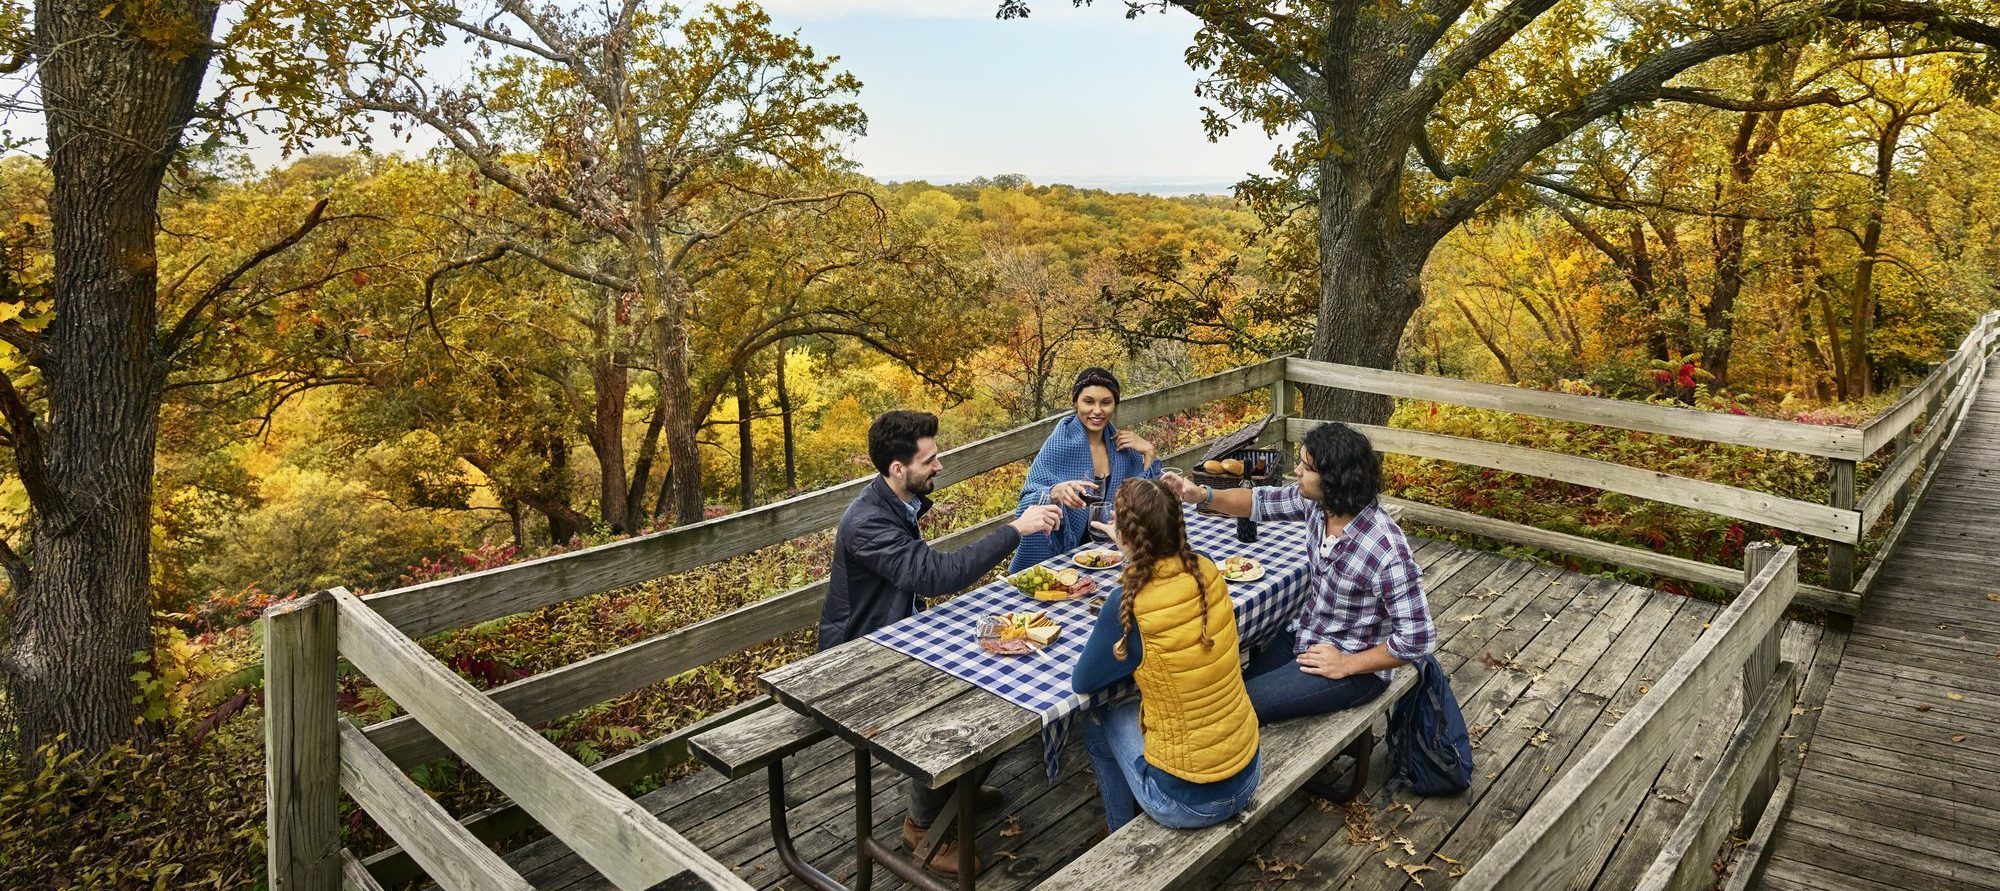 Group of friends having a picnic at a scenic outlook